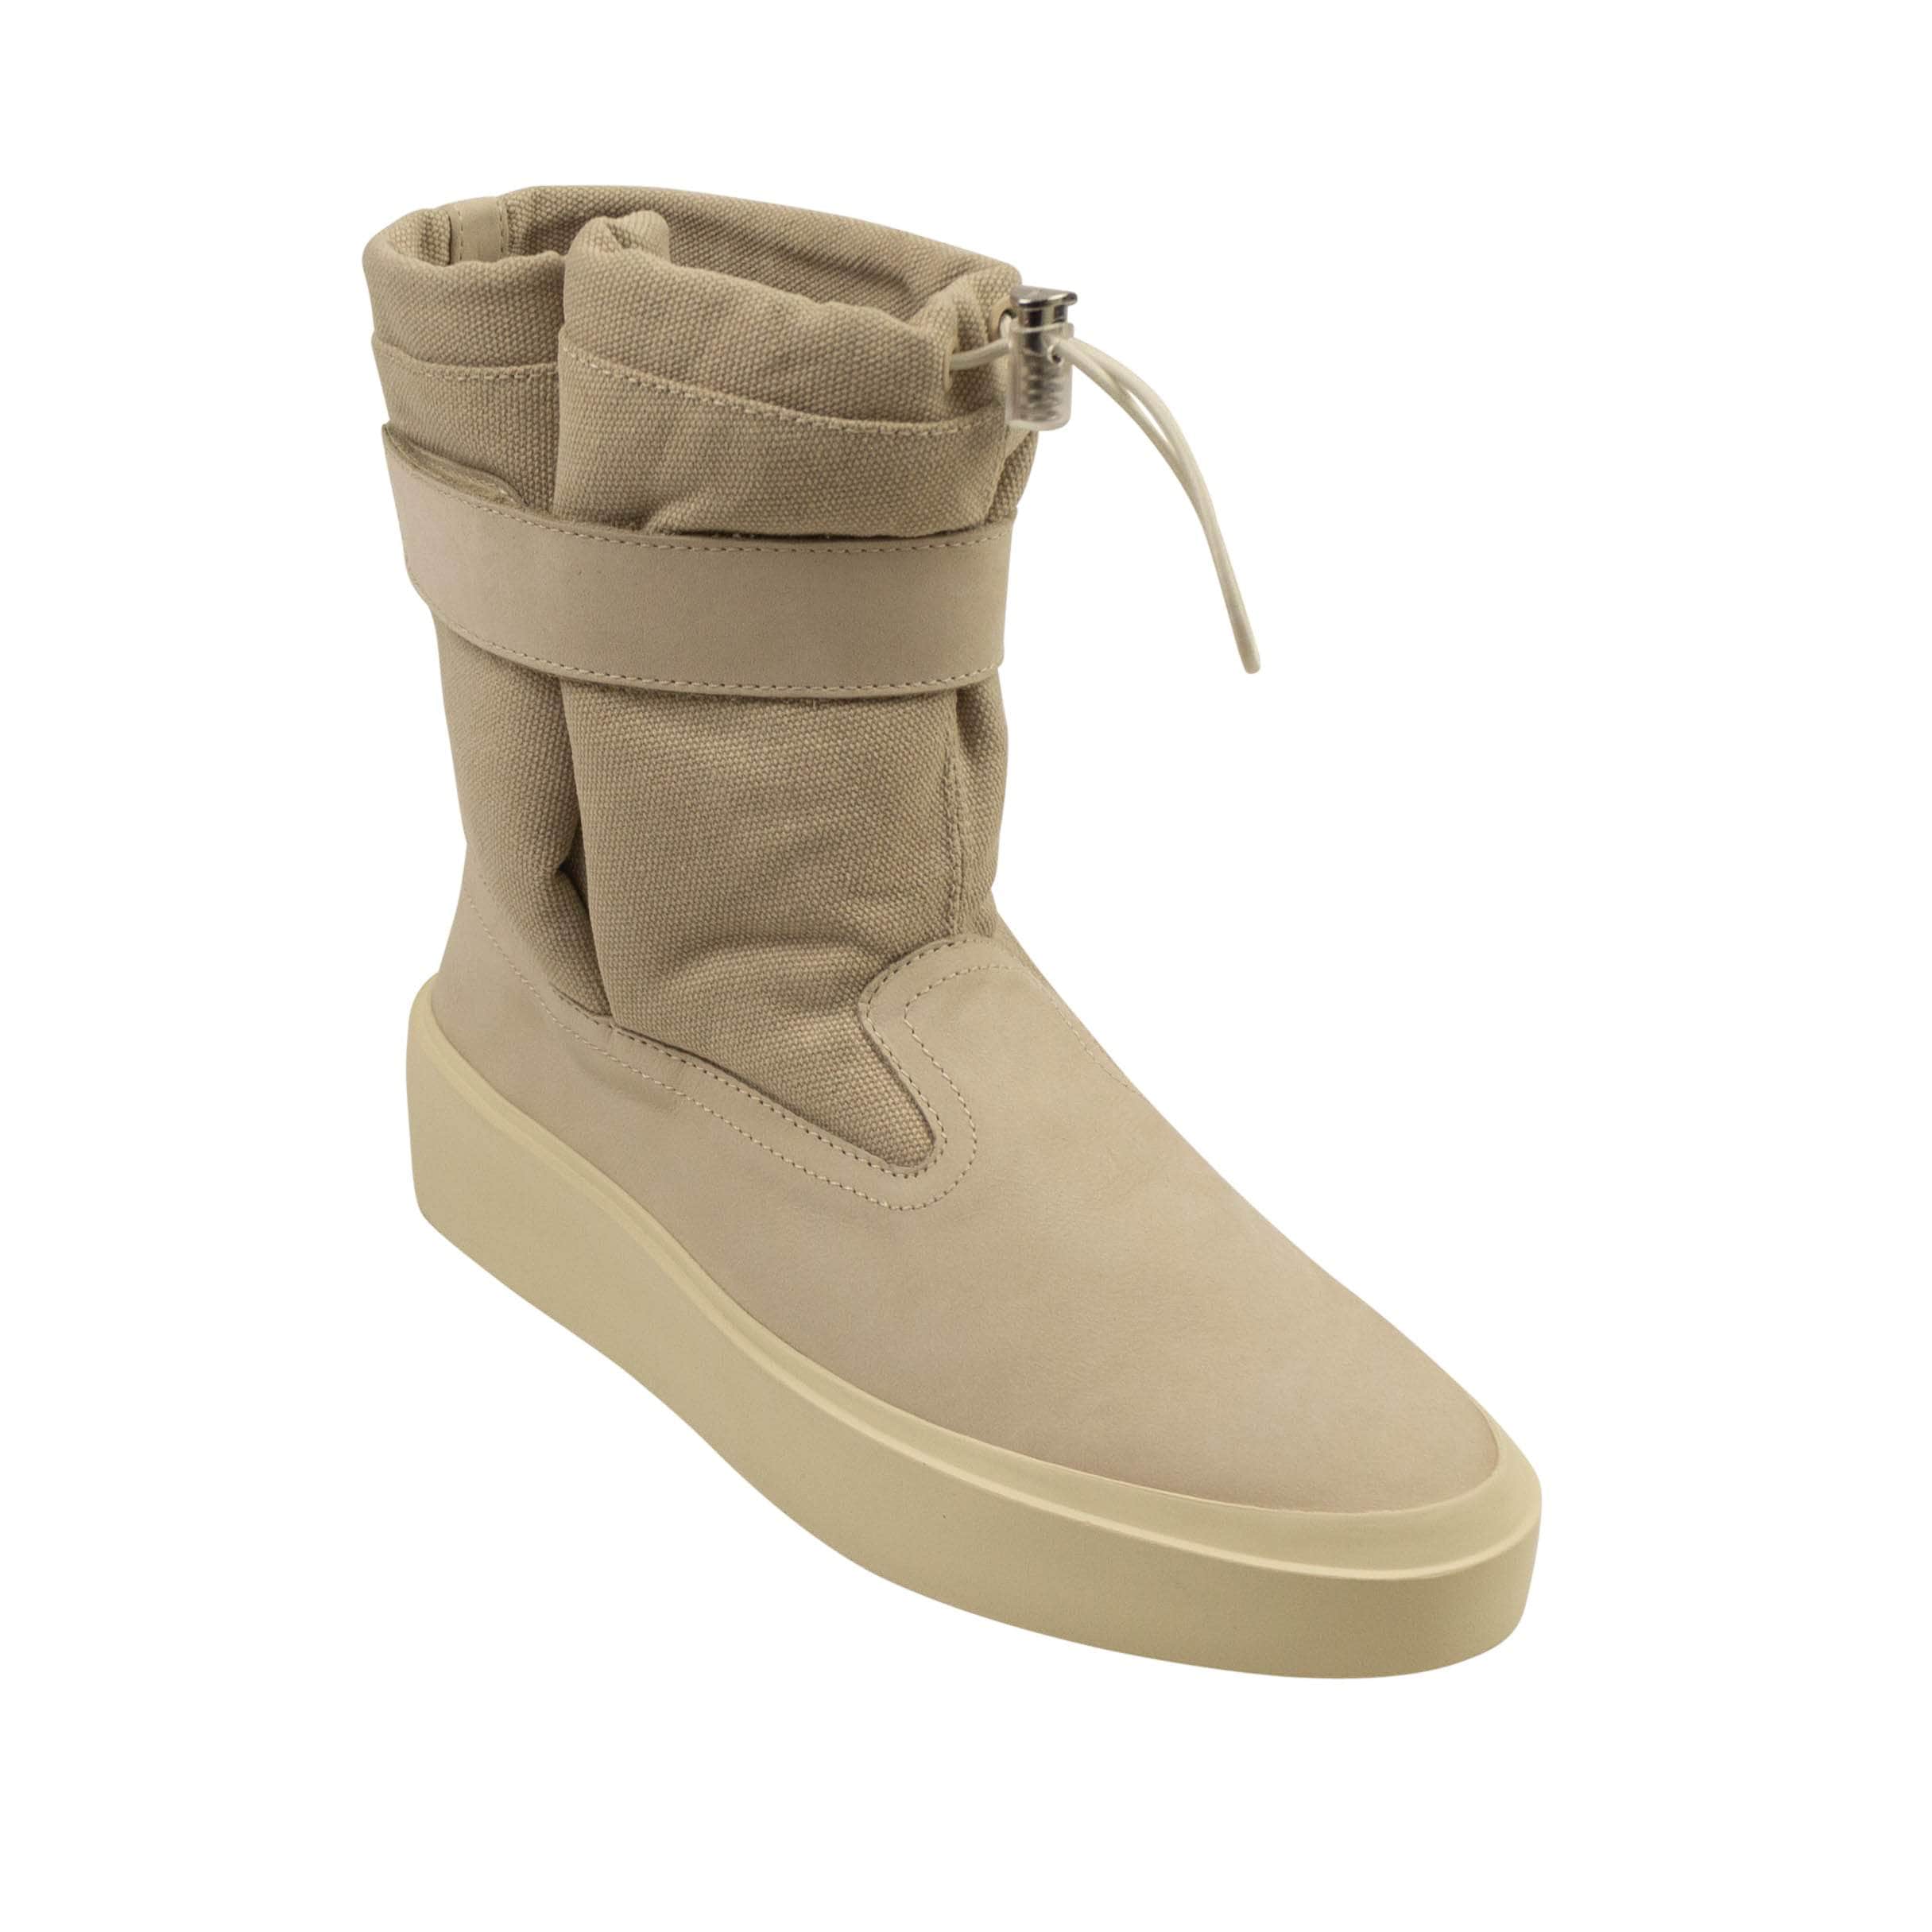 Fear Of God 500-750, channelenable-all, chicmi, couponcollection, fear-of-god, gender-mens, main-shoes, mens-ankle-boots, mens-shoes, MixedApparel, size-45, size-47 Bone Ski Lounge Ankle Boots